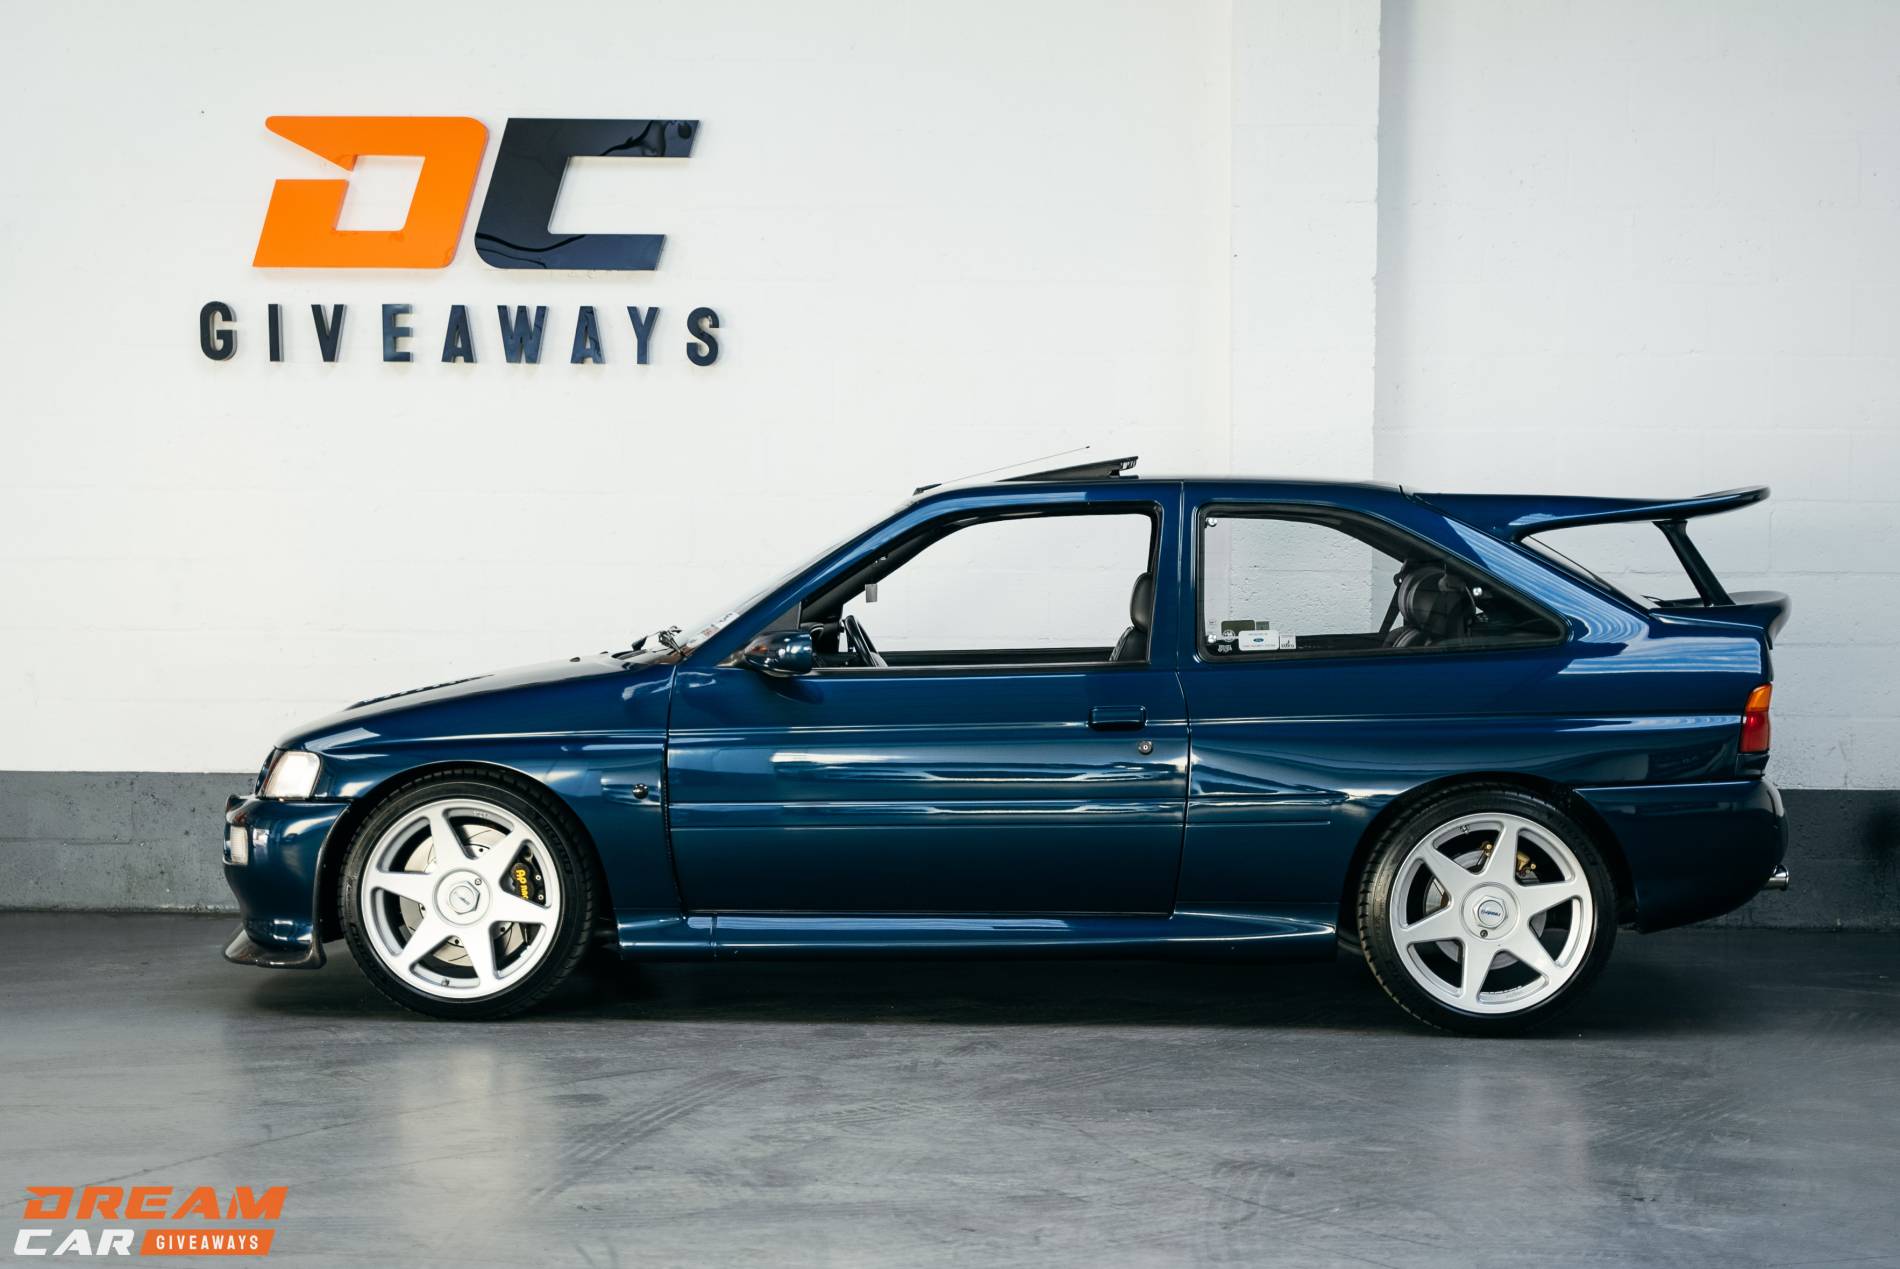 Ford Escort RS Cosworth & £1000